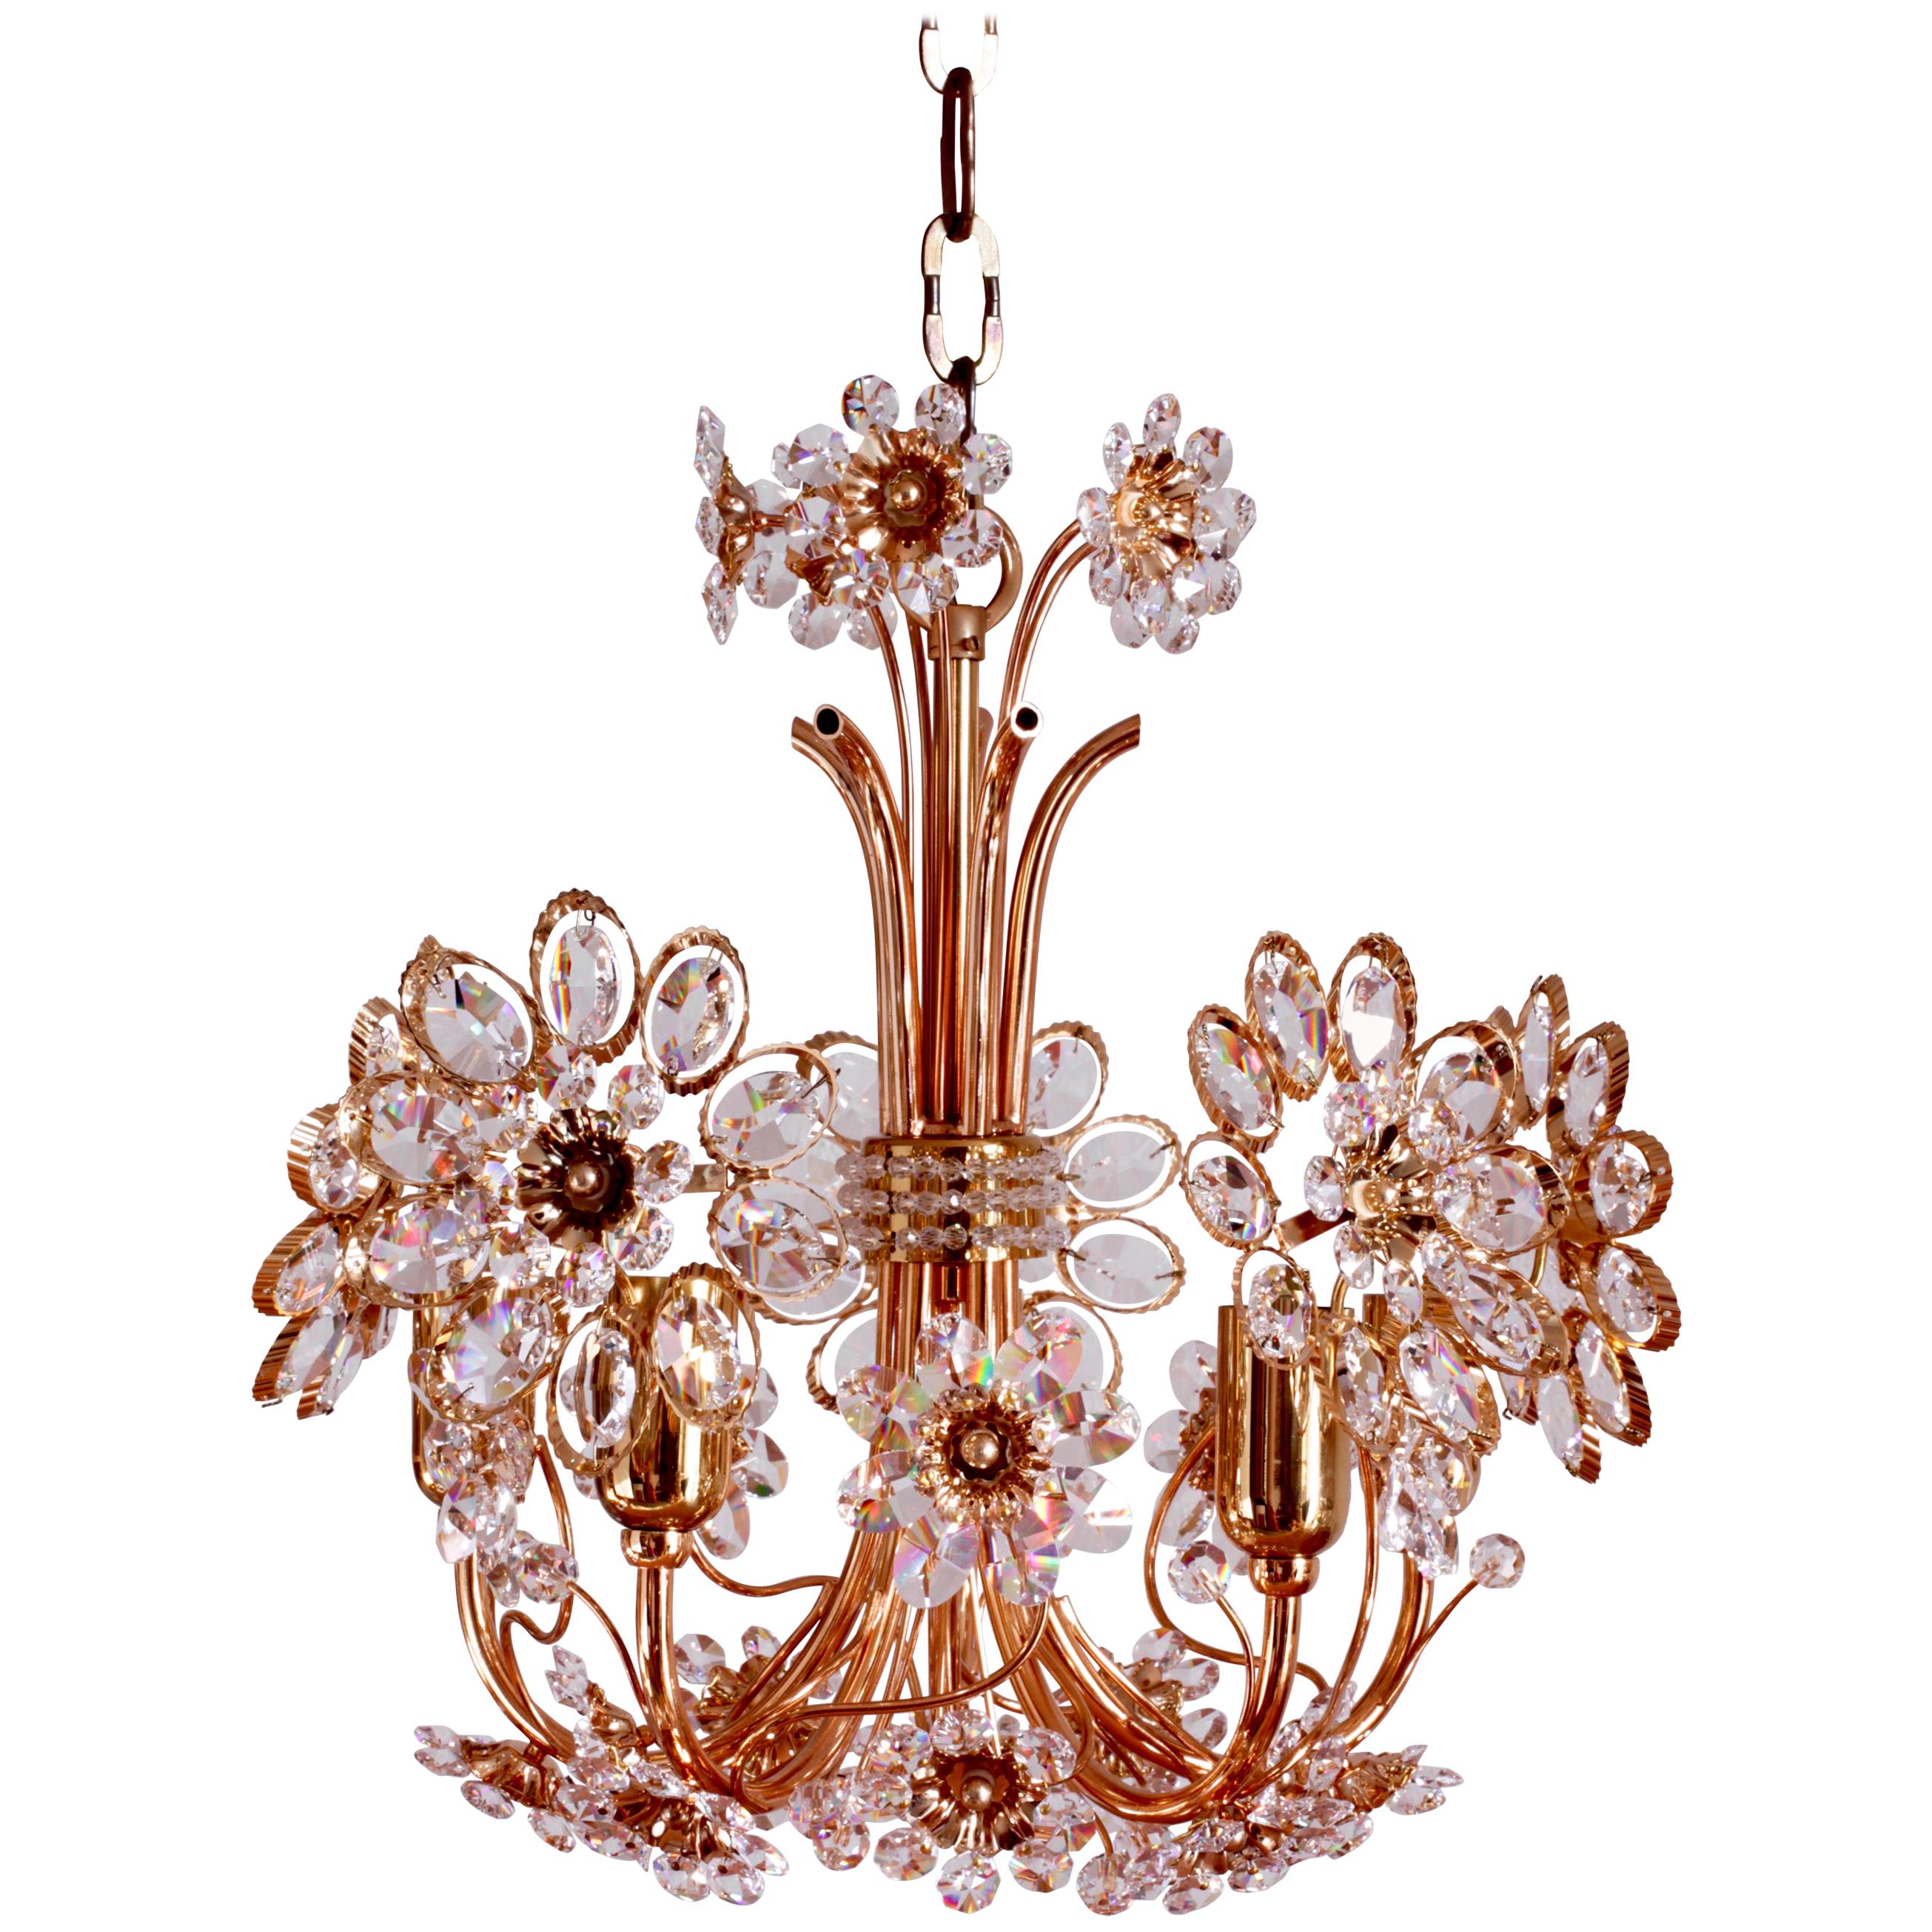 Stunning Gold-Plated and Cut Crystal Chandelier by Palwa, Germany, circa 1970